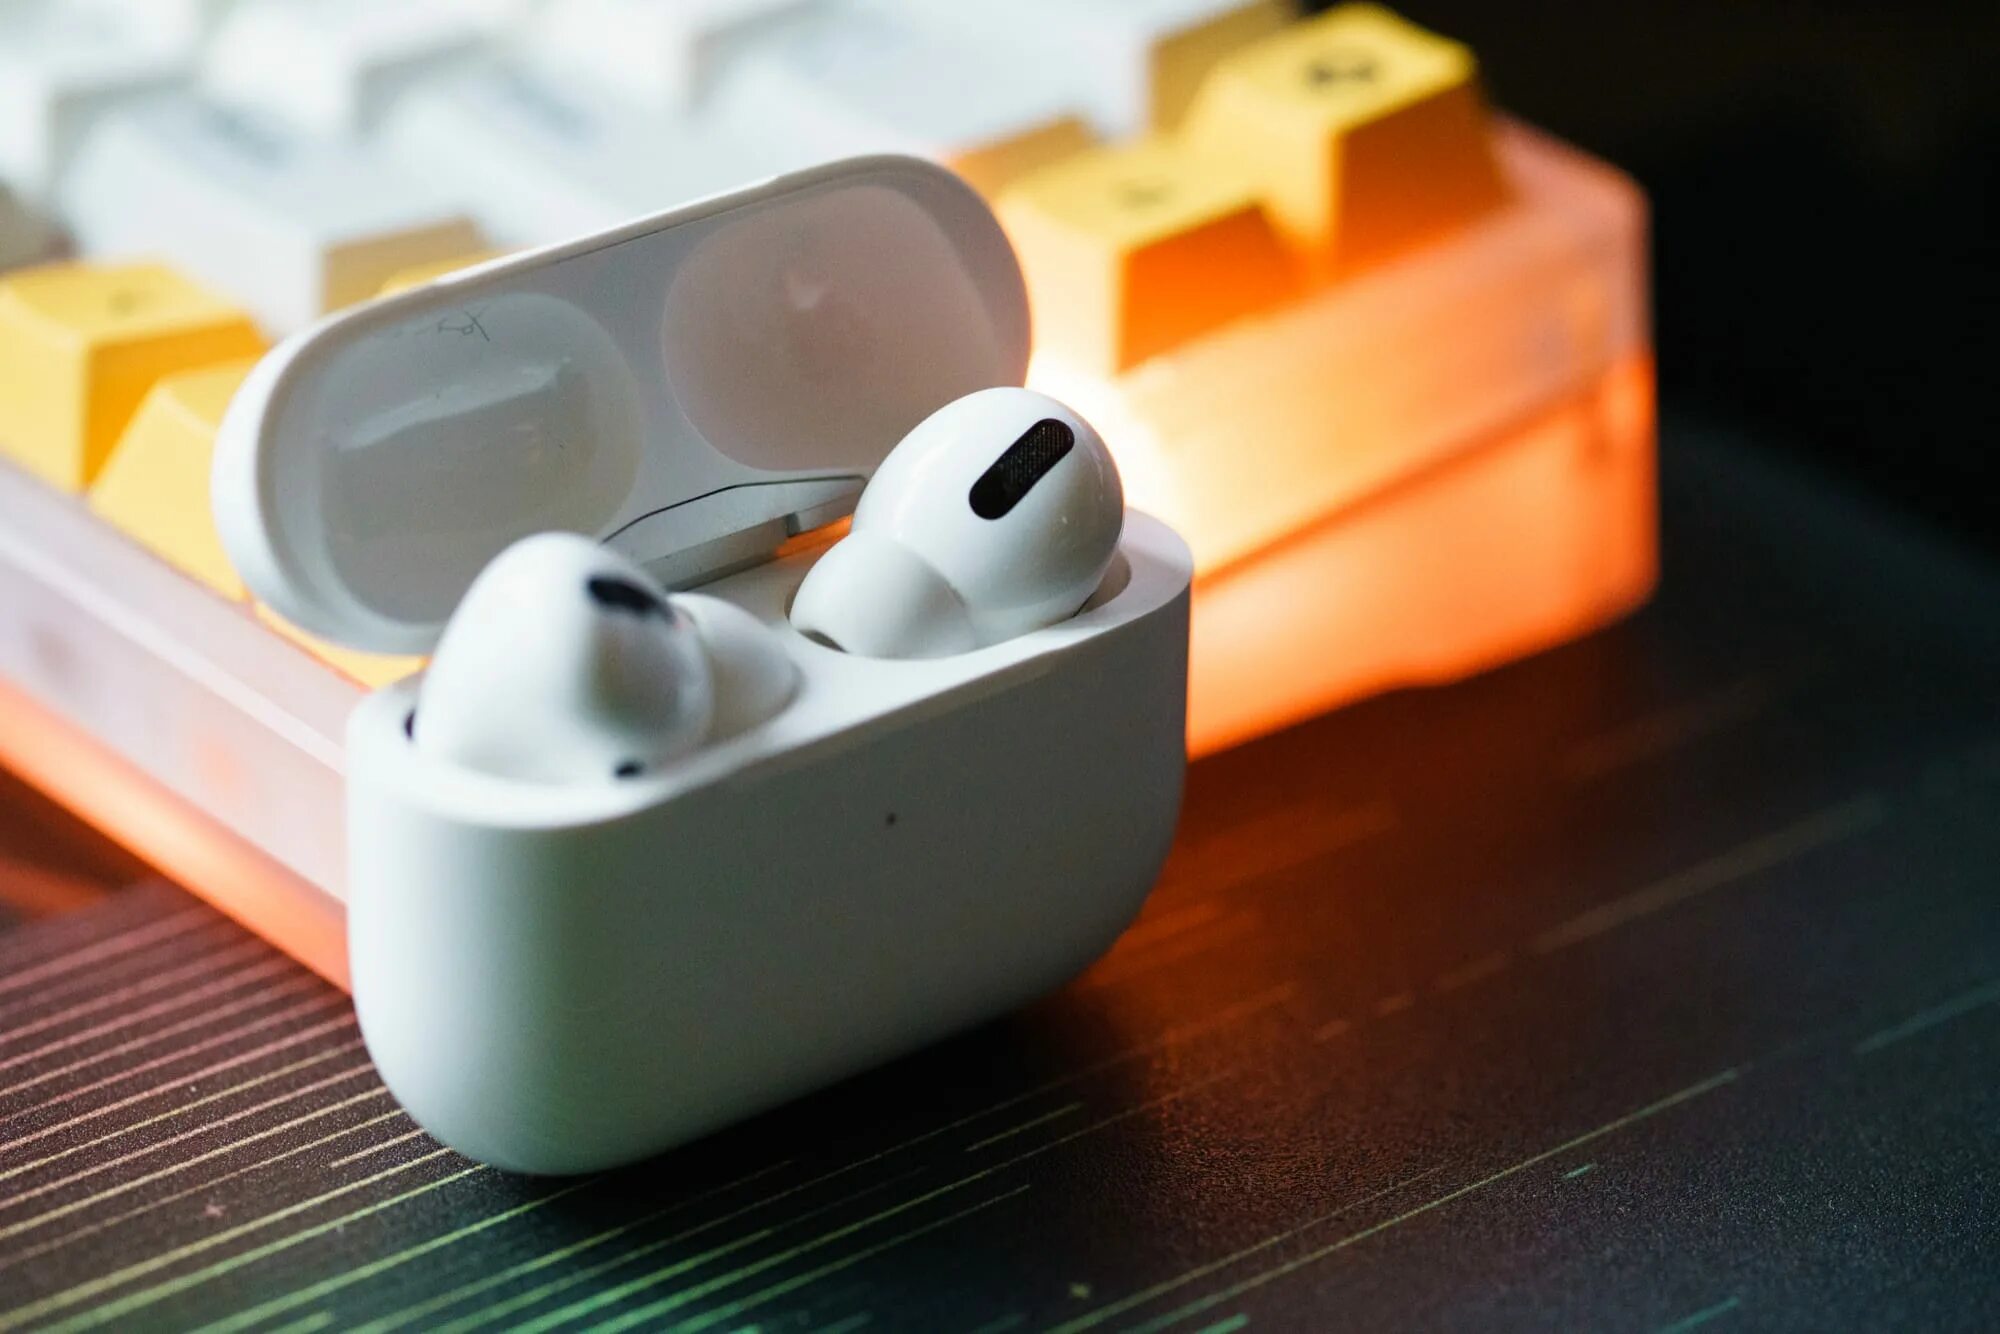 Airpods pro premium. AIRPODS Pro 2. Air pods Pro 1. Air pods Pro 3. AIRPODS Pro 2 Premium.